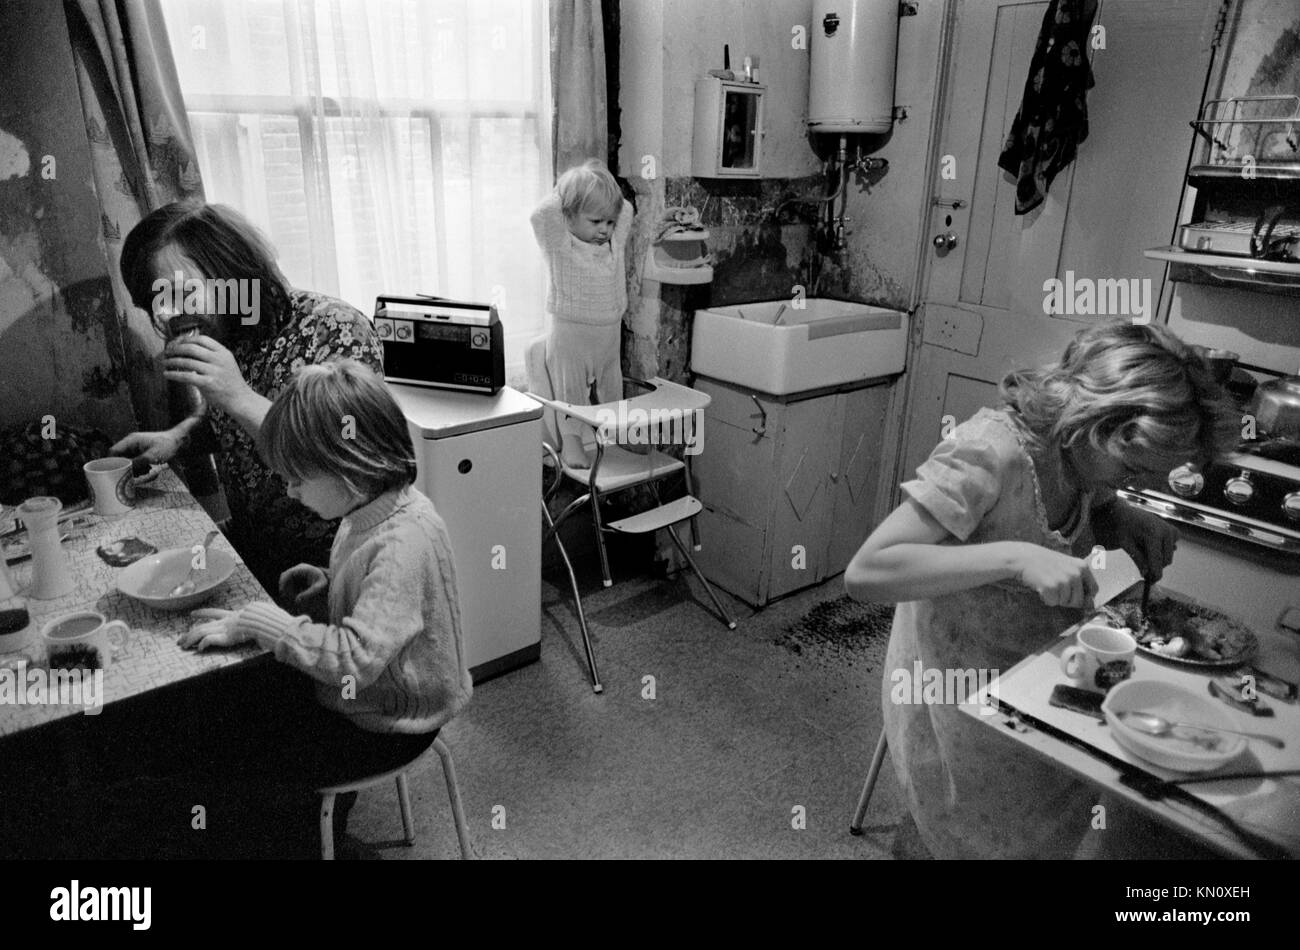 Poverty living in poverty 1970s UK. Slum housing, kitchen doubles as bathroom. Family eating together. Ascot gas water heater on the the wall above the butler sink 1972  England HOMER SYKES Stock Photo